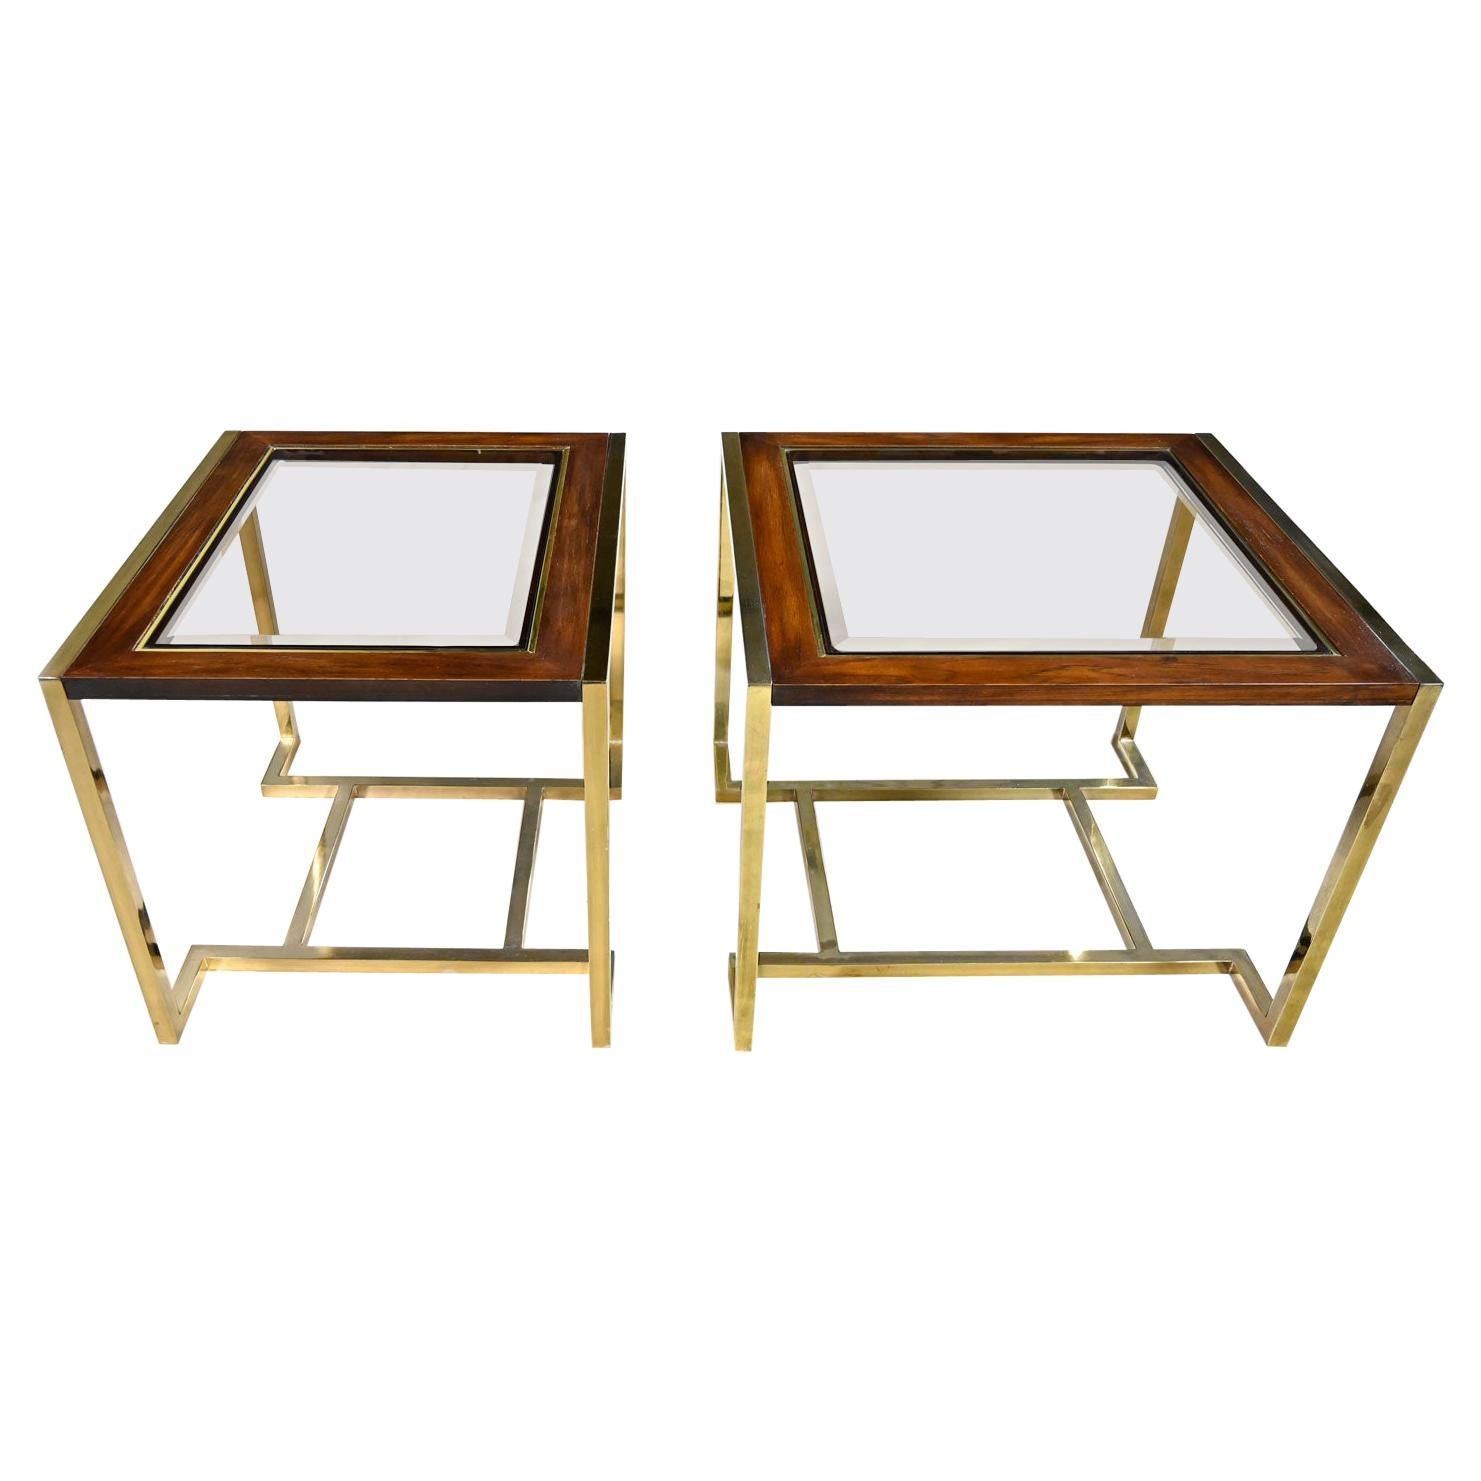 2 Brass Plated Wood & Glass End Tables by Thomasville Furn Style Milo Baughman